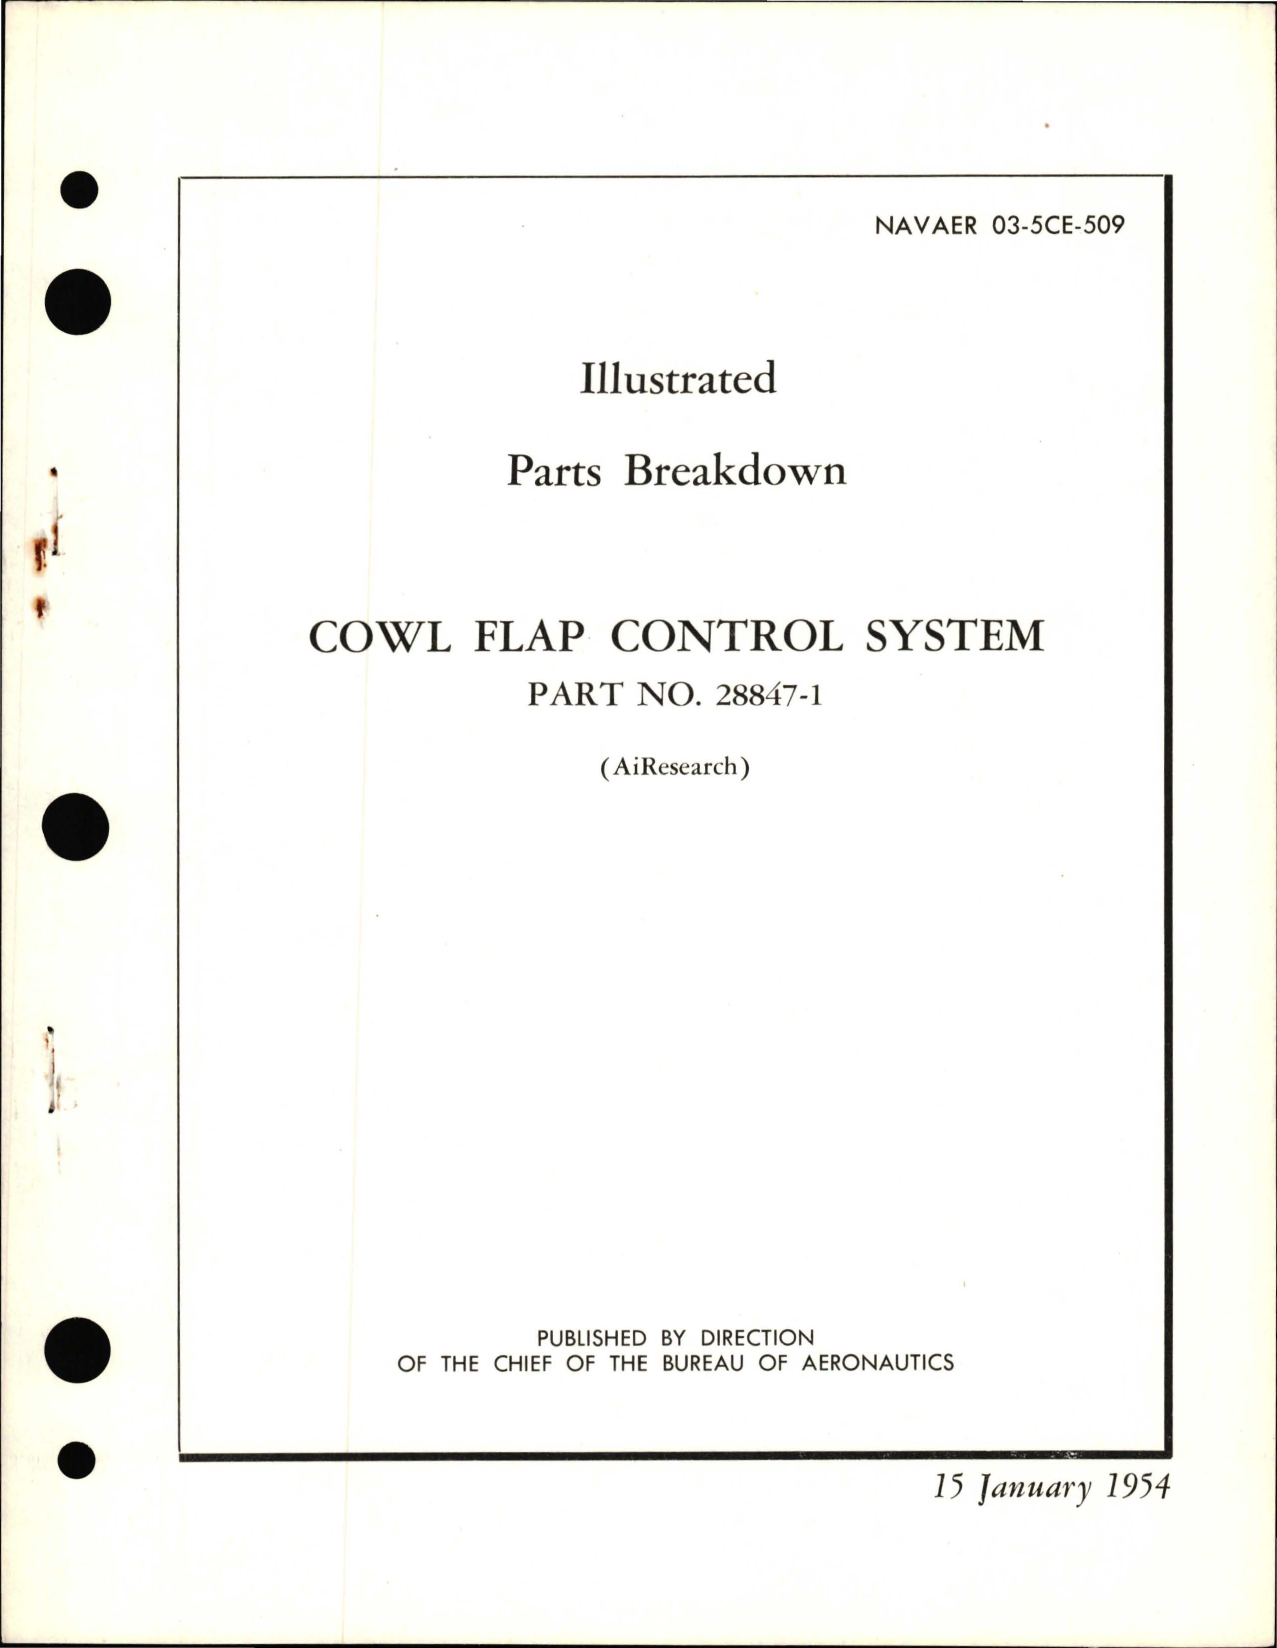 Sample page 1 from AirCorps Library document: Illustrated Parts Breakdown for Cowl Flap Control System - Part 28847-1